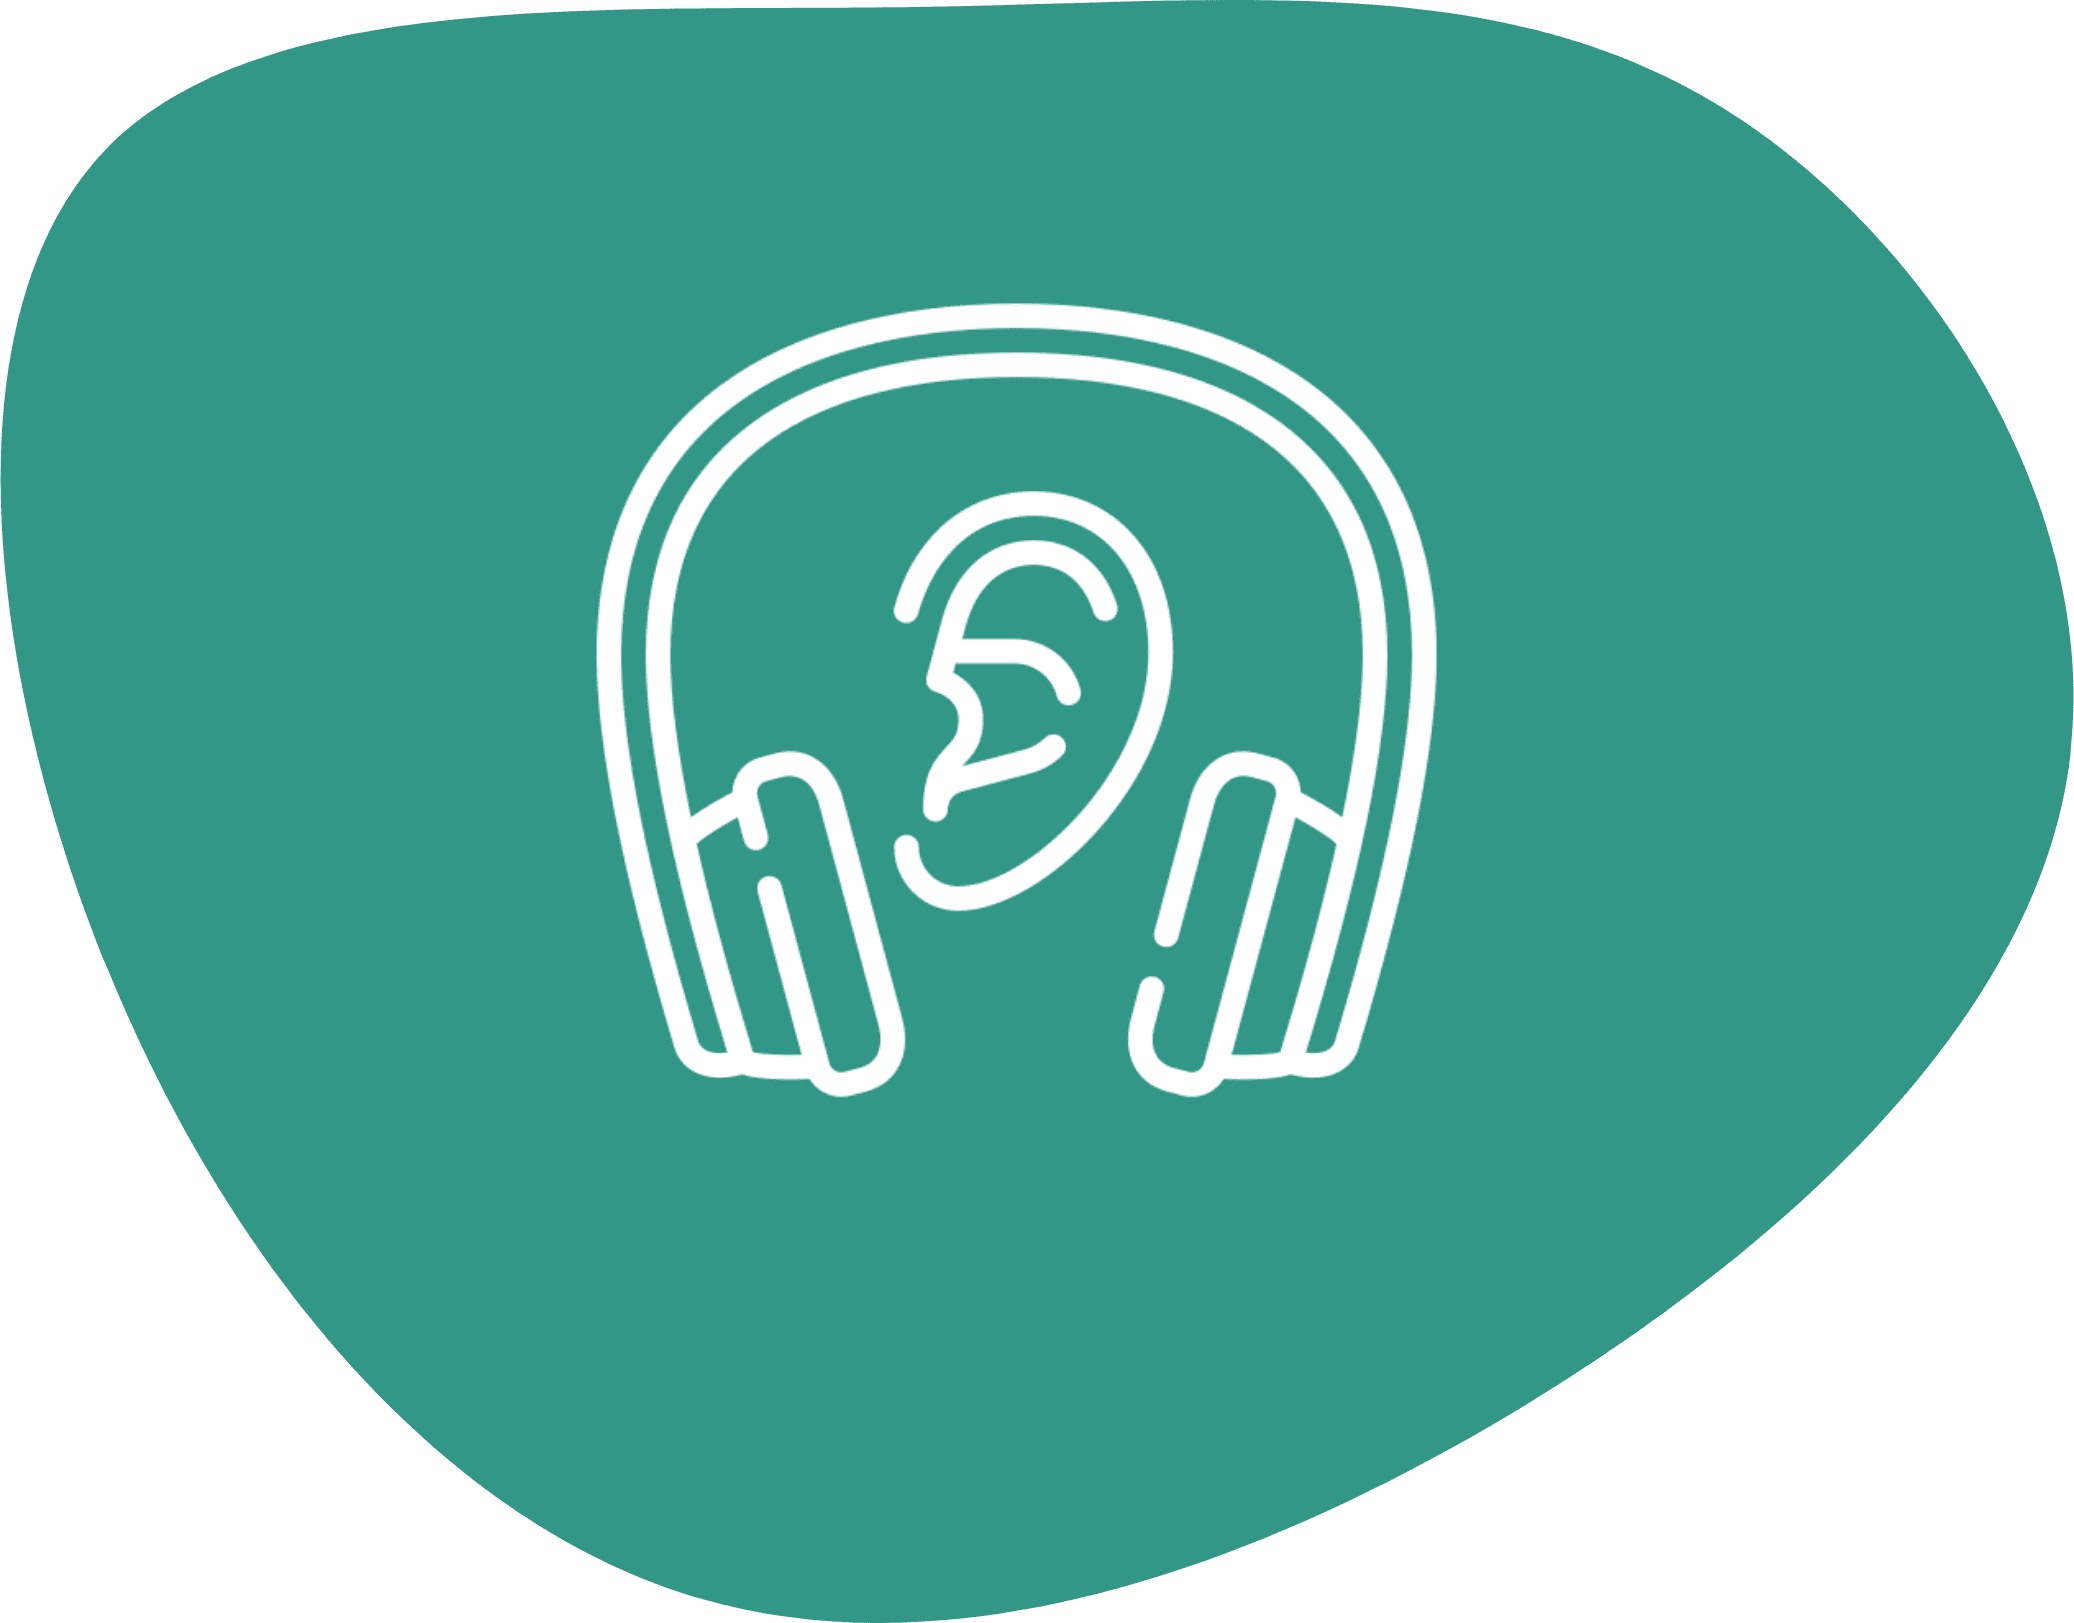 Hearing assessment icon